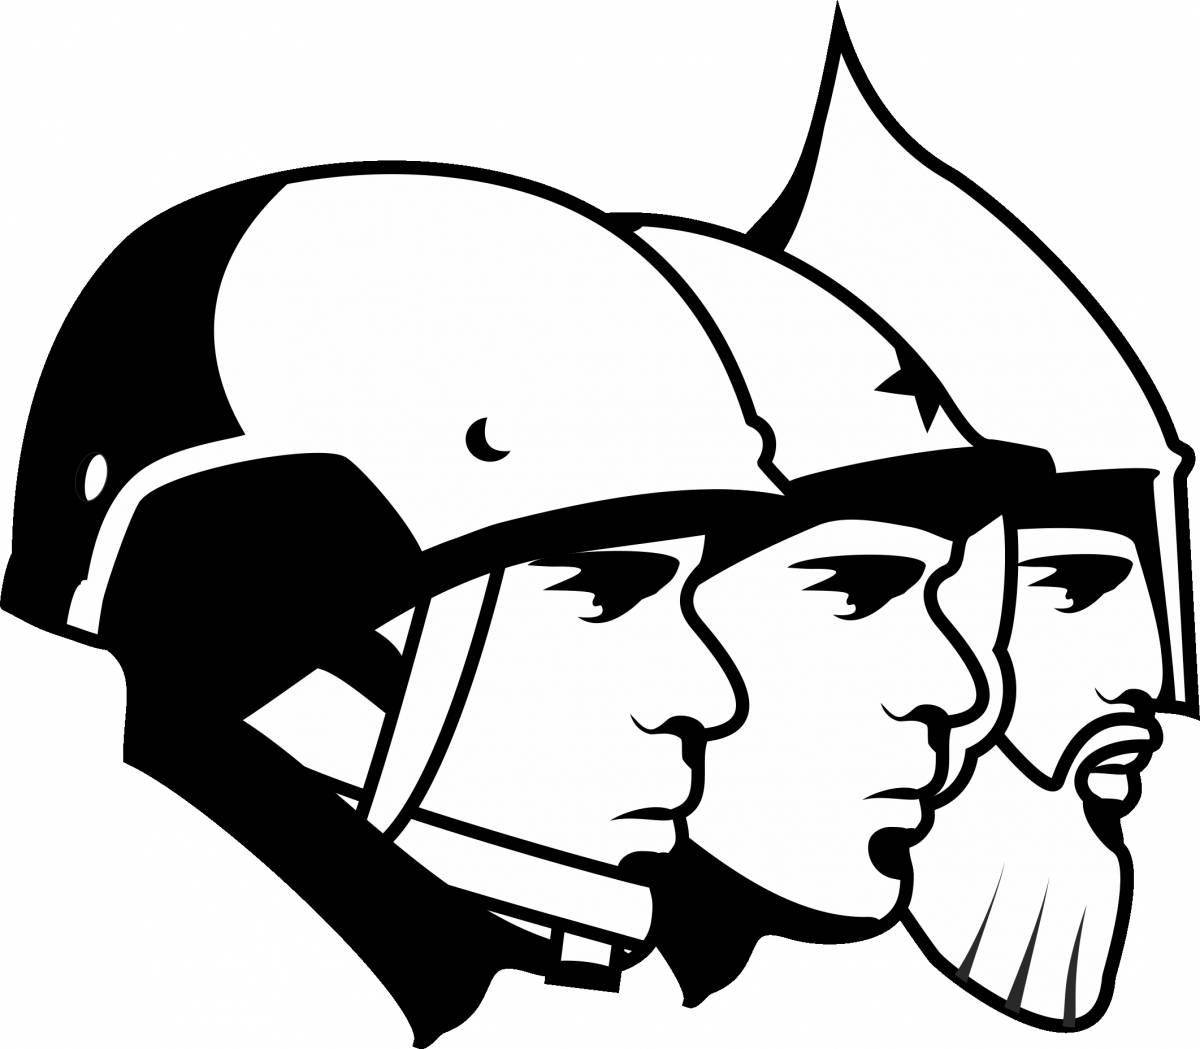 Colouring shiny soldier's helmet